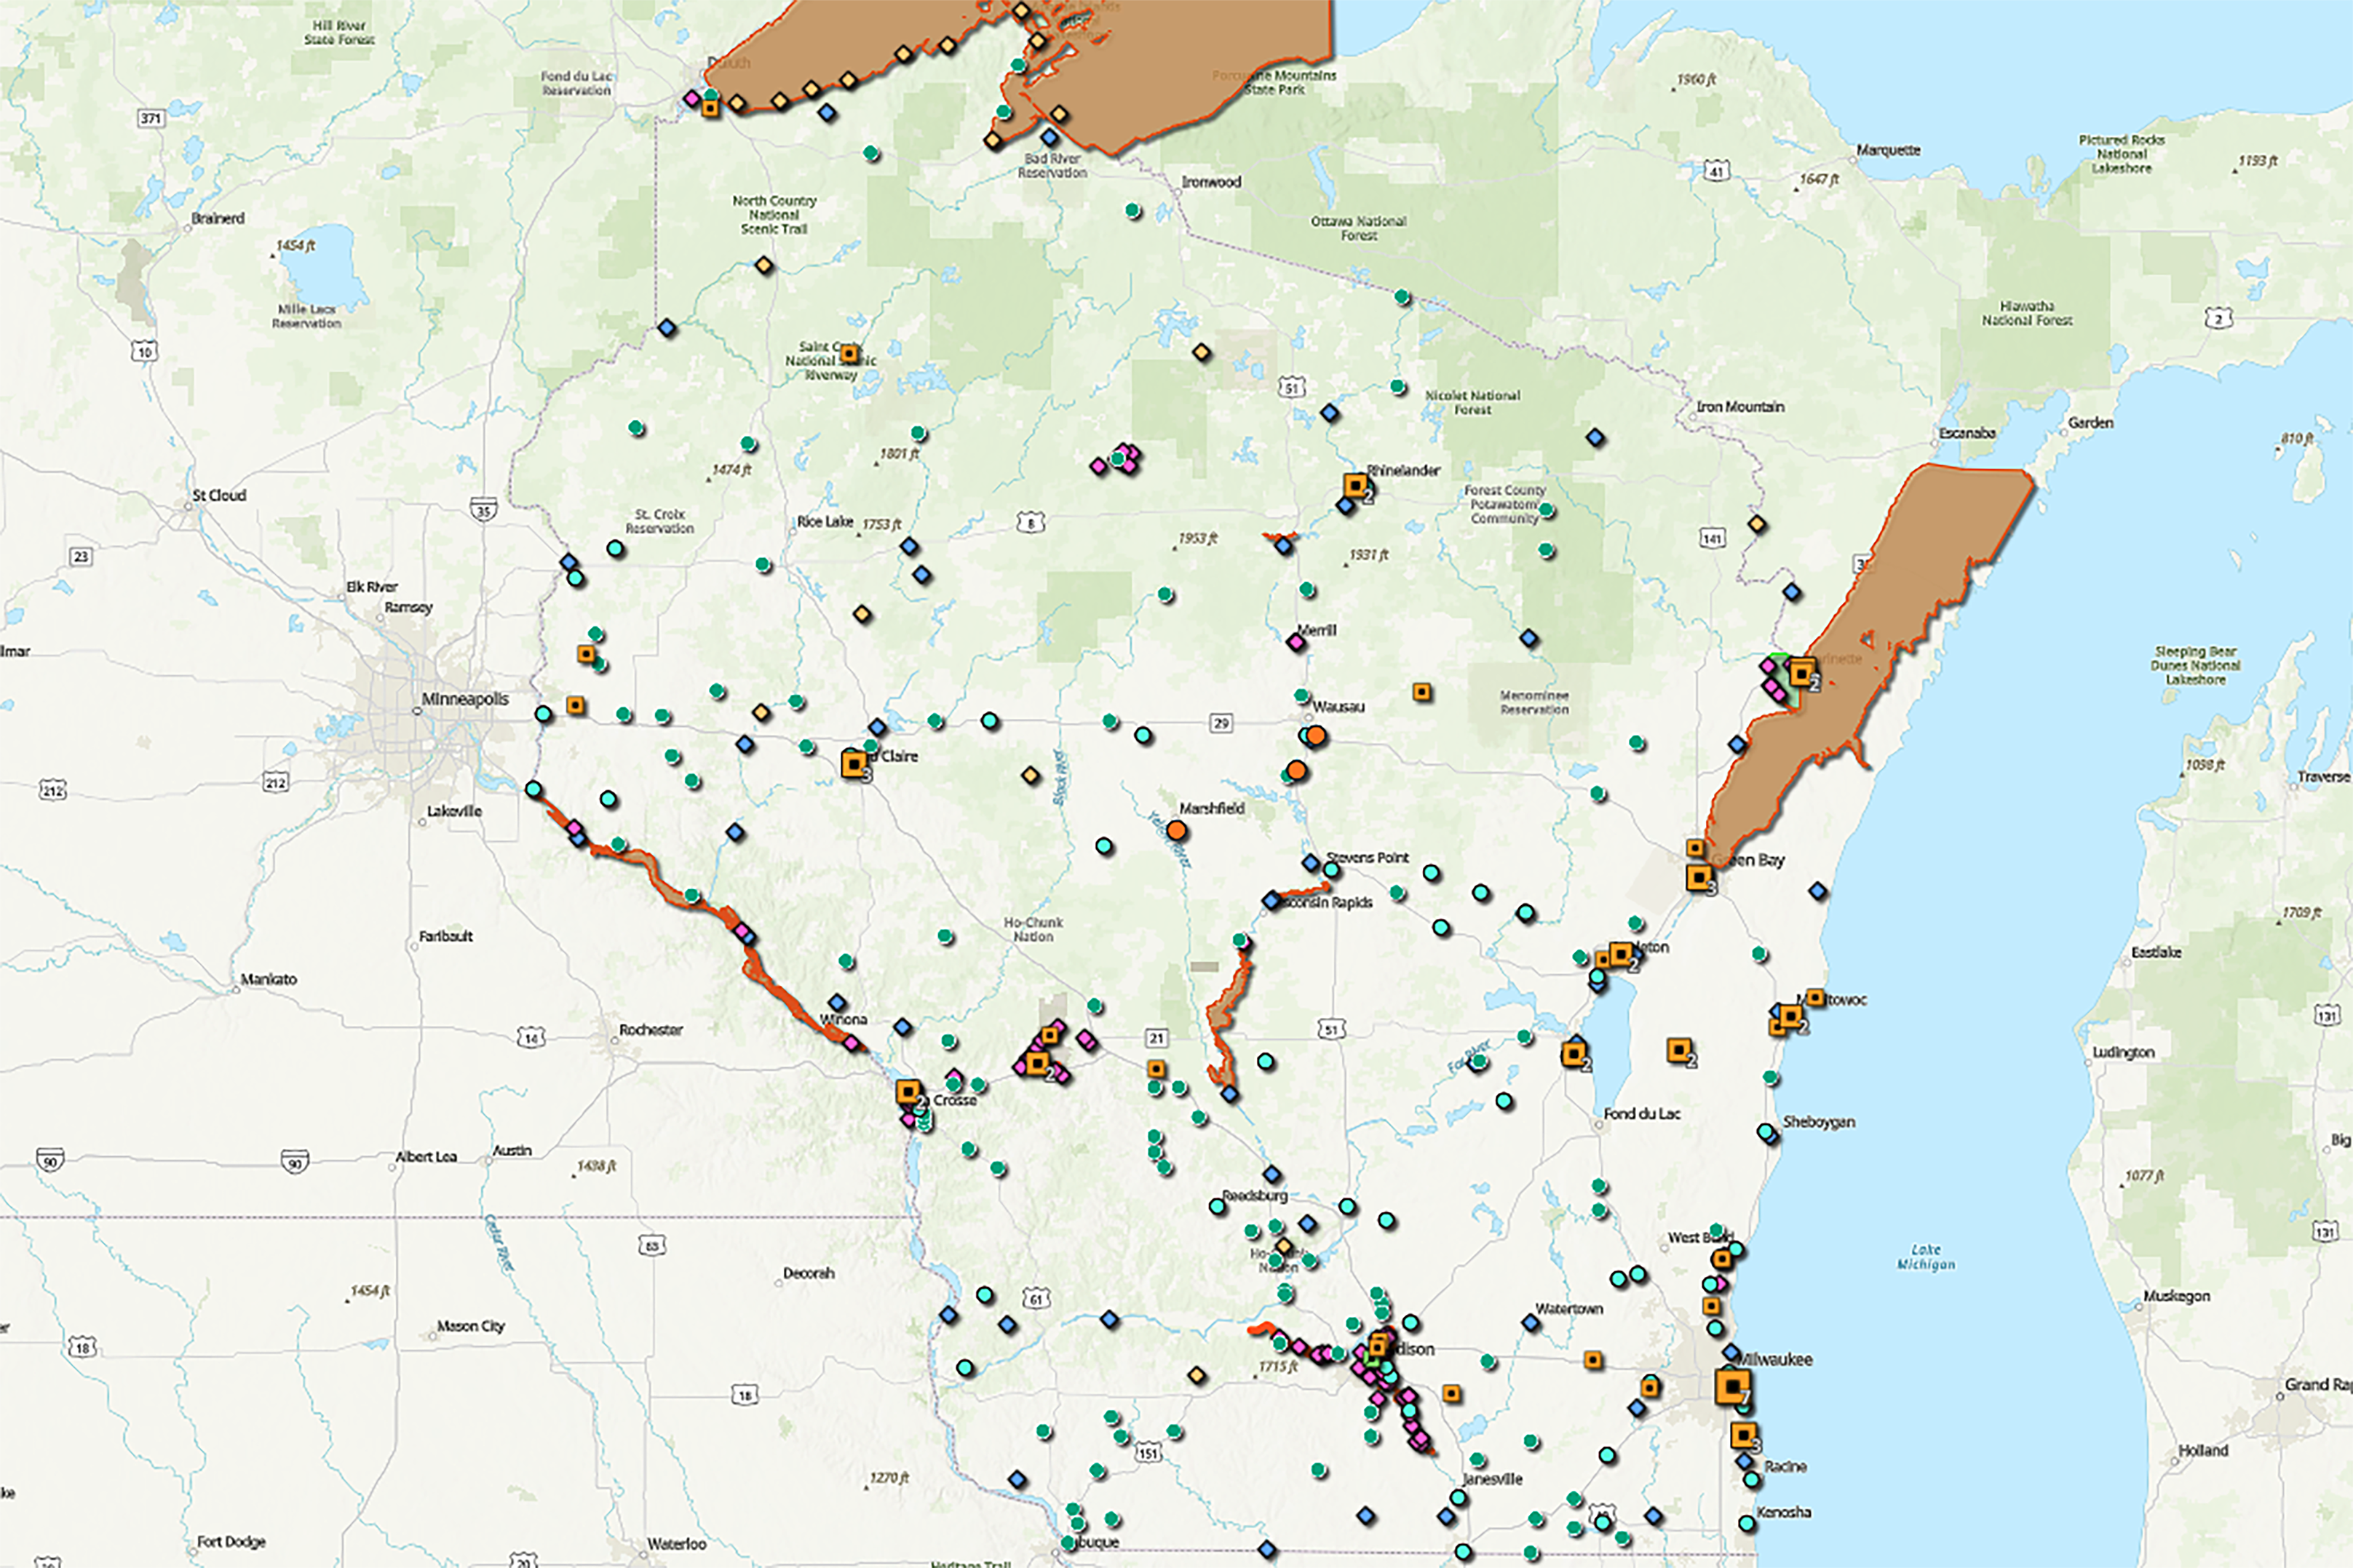 An image of a map of Wisconsin with symbols on it. The map is meant to help inform people about PFAS in the state.